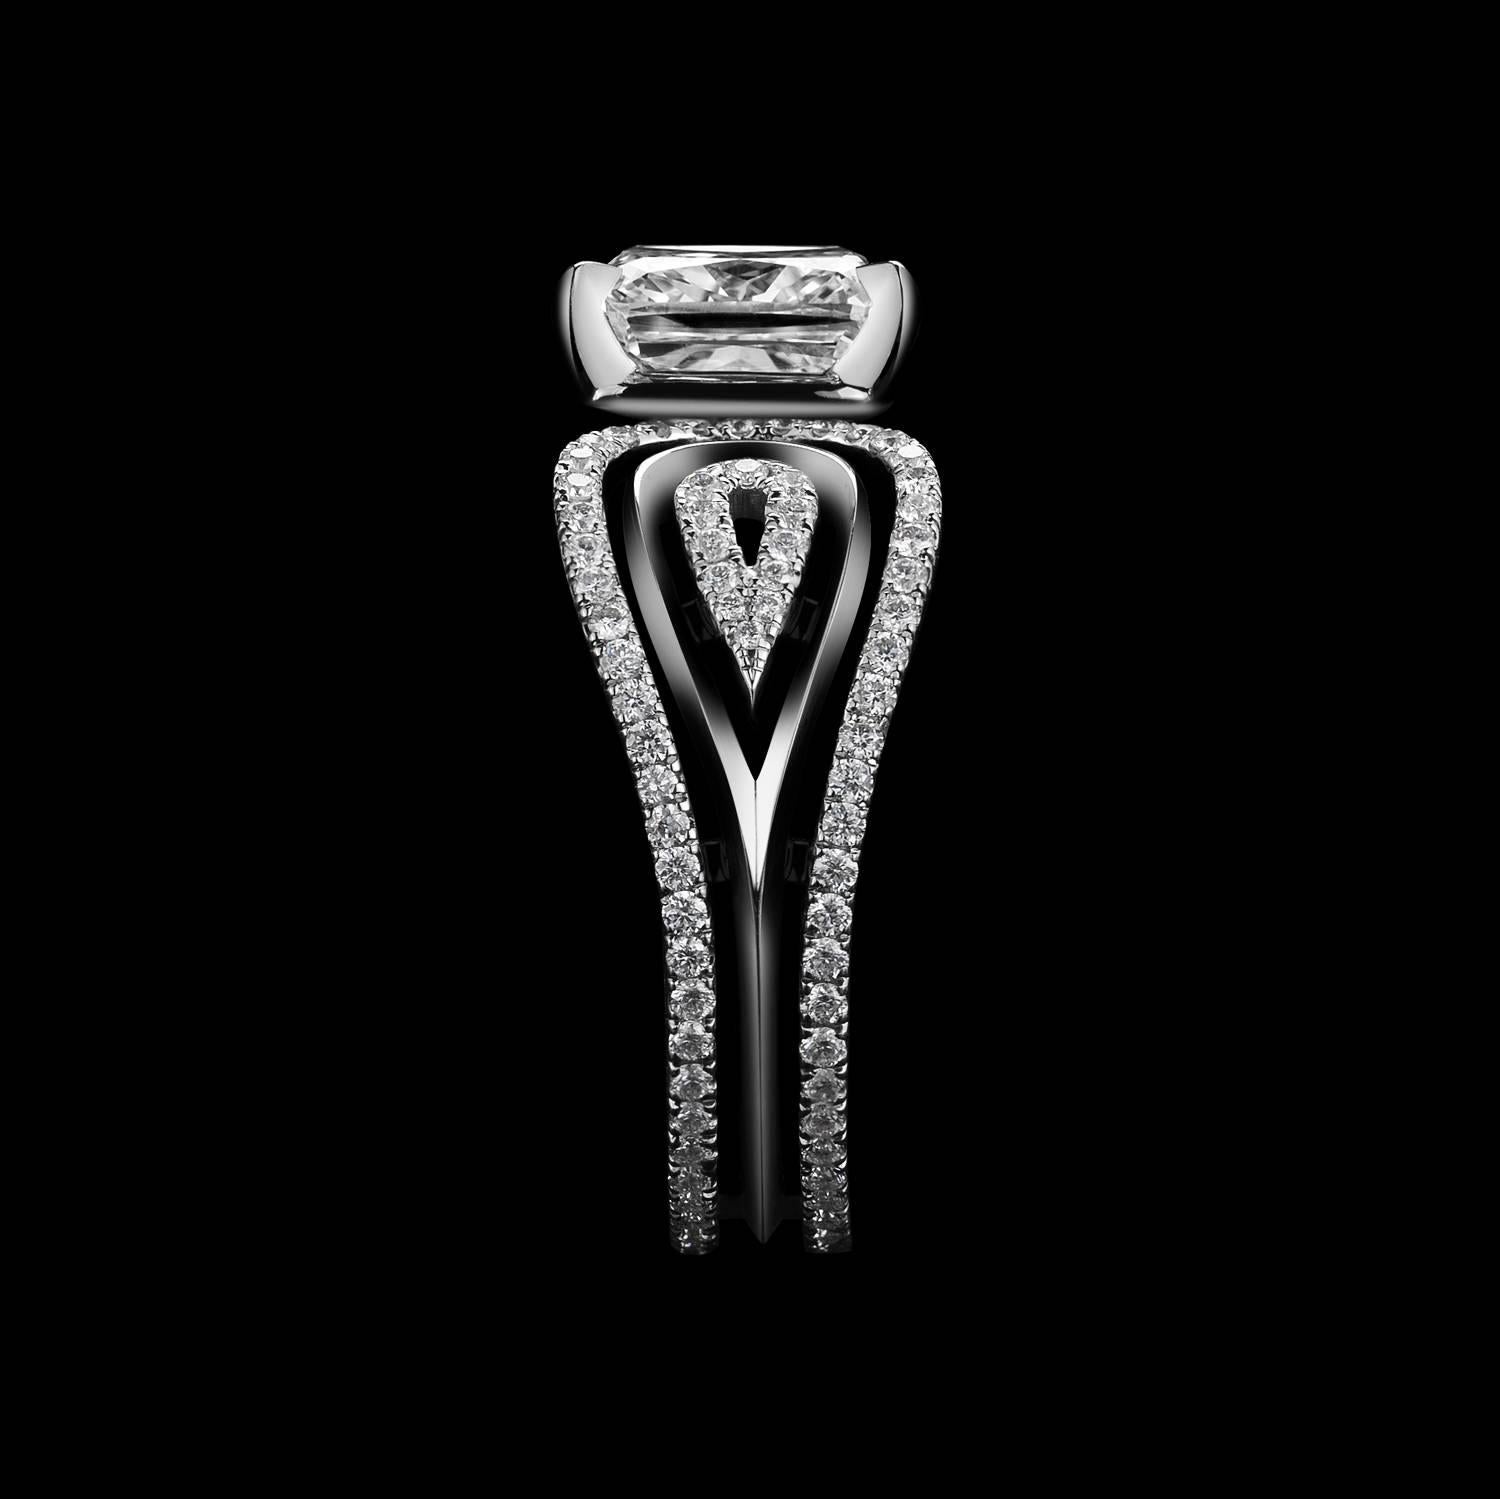 This ring features a 2.85 carat Cushion-cut Brilliant Diamond center with GIA grading report stating color and clarity is G VS1;  detailed by Alexandra Mor signature floating diamond melee and knife-edged wire. Total Diamond melle weight is .57